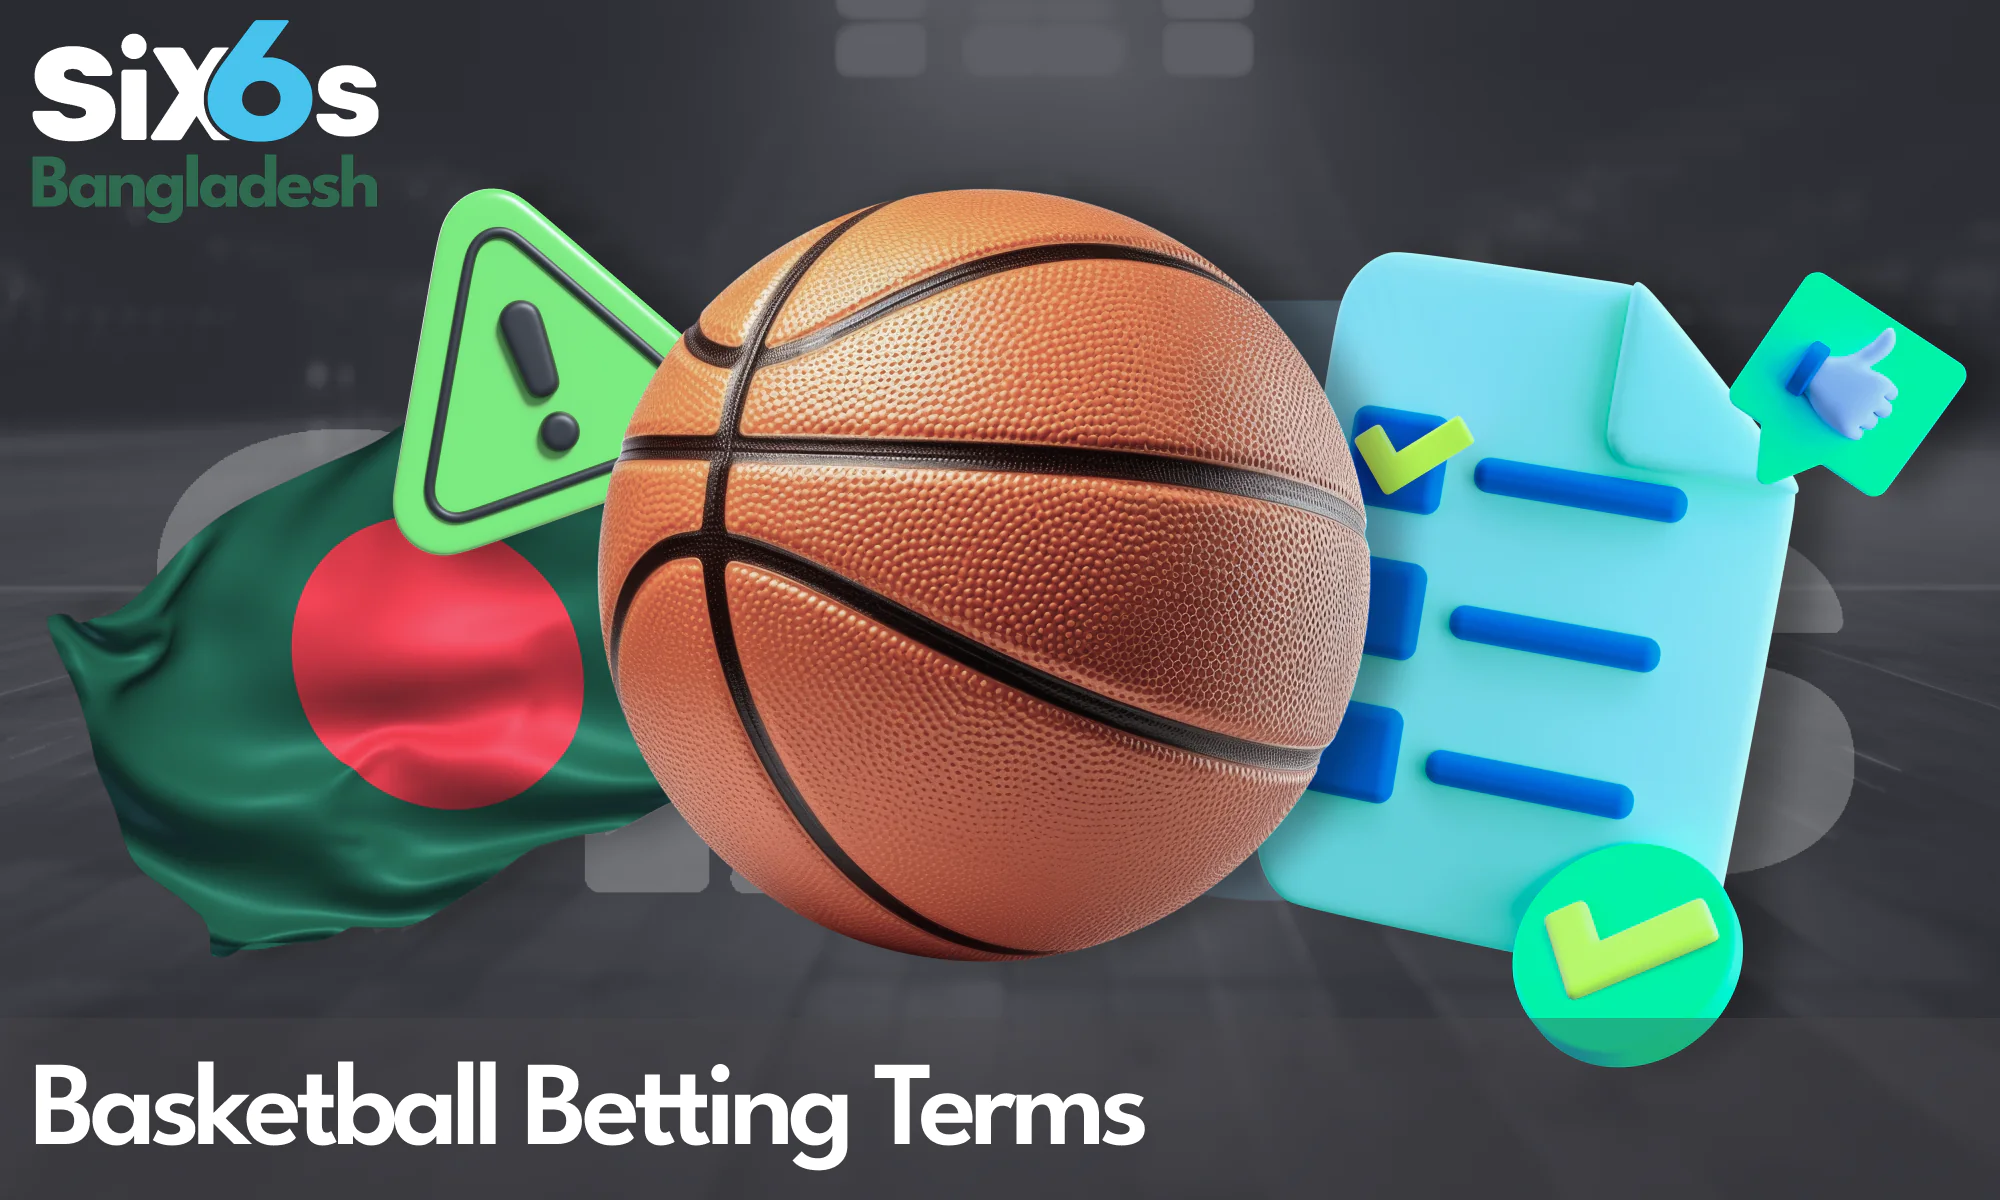 Terms for basketball betting for Six6s players from Bangladesh